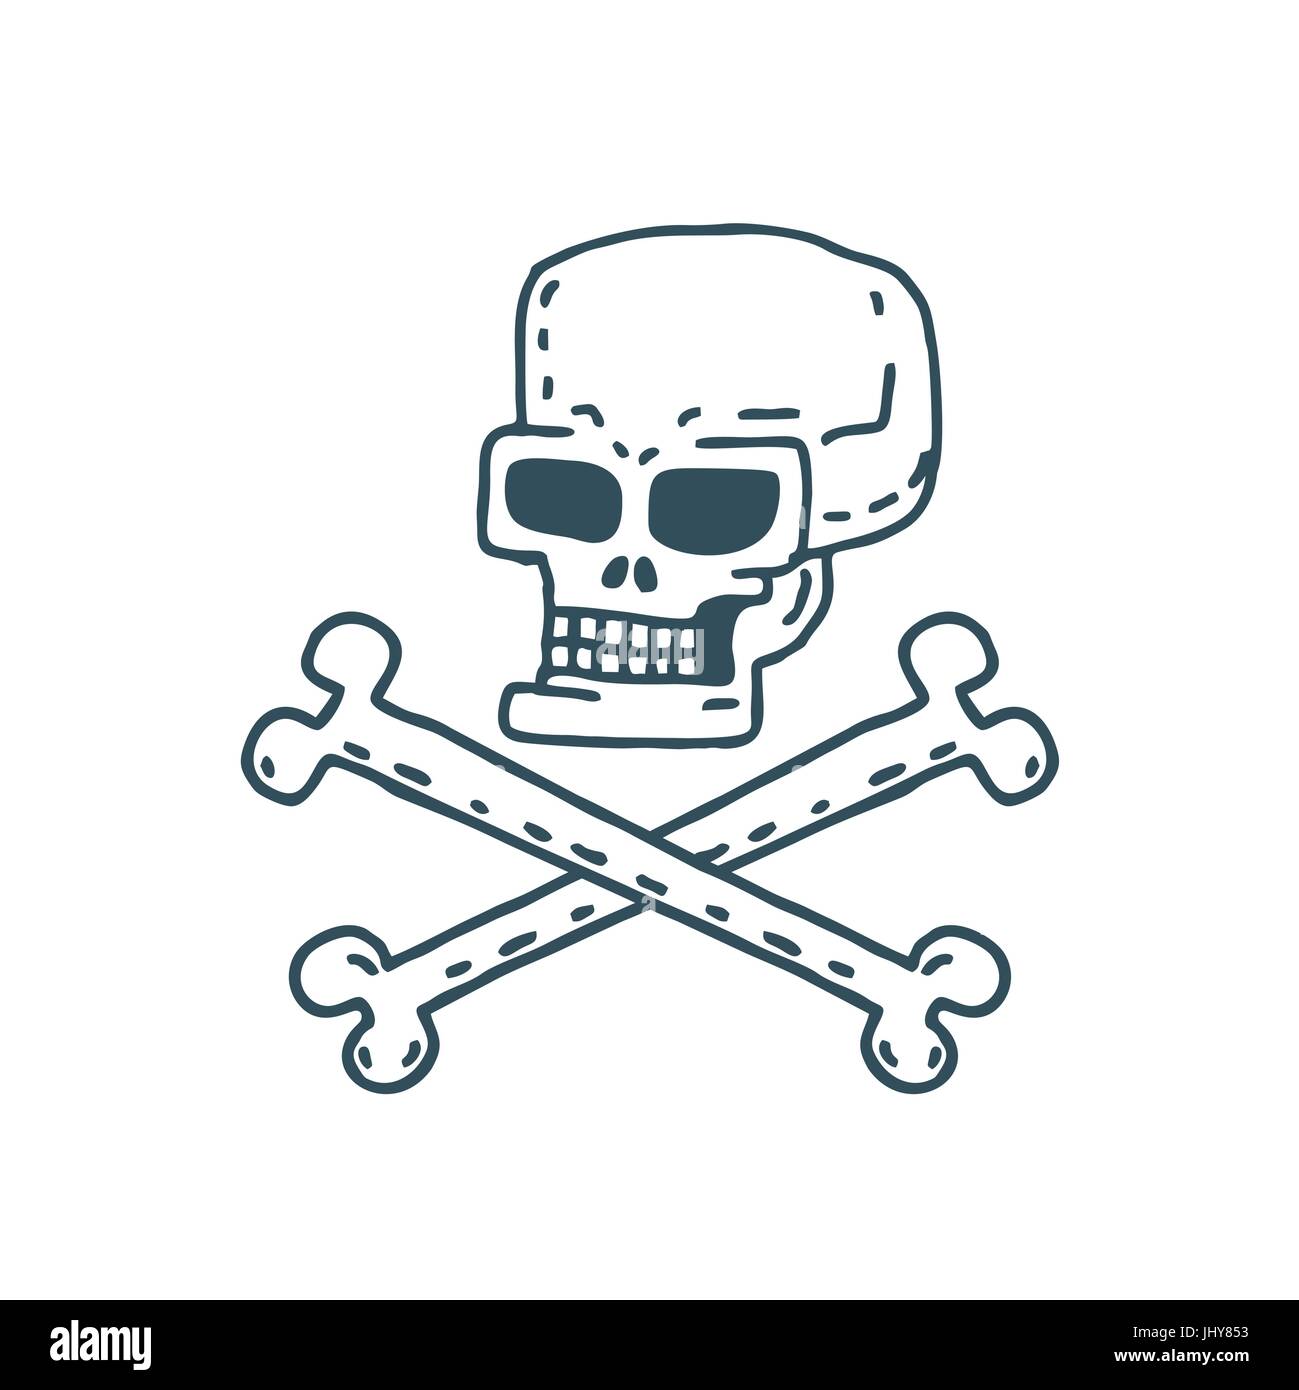 How To Draw A Cartoon Skull  ClipArt Best